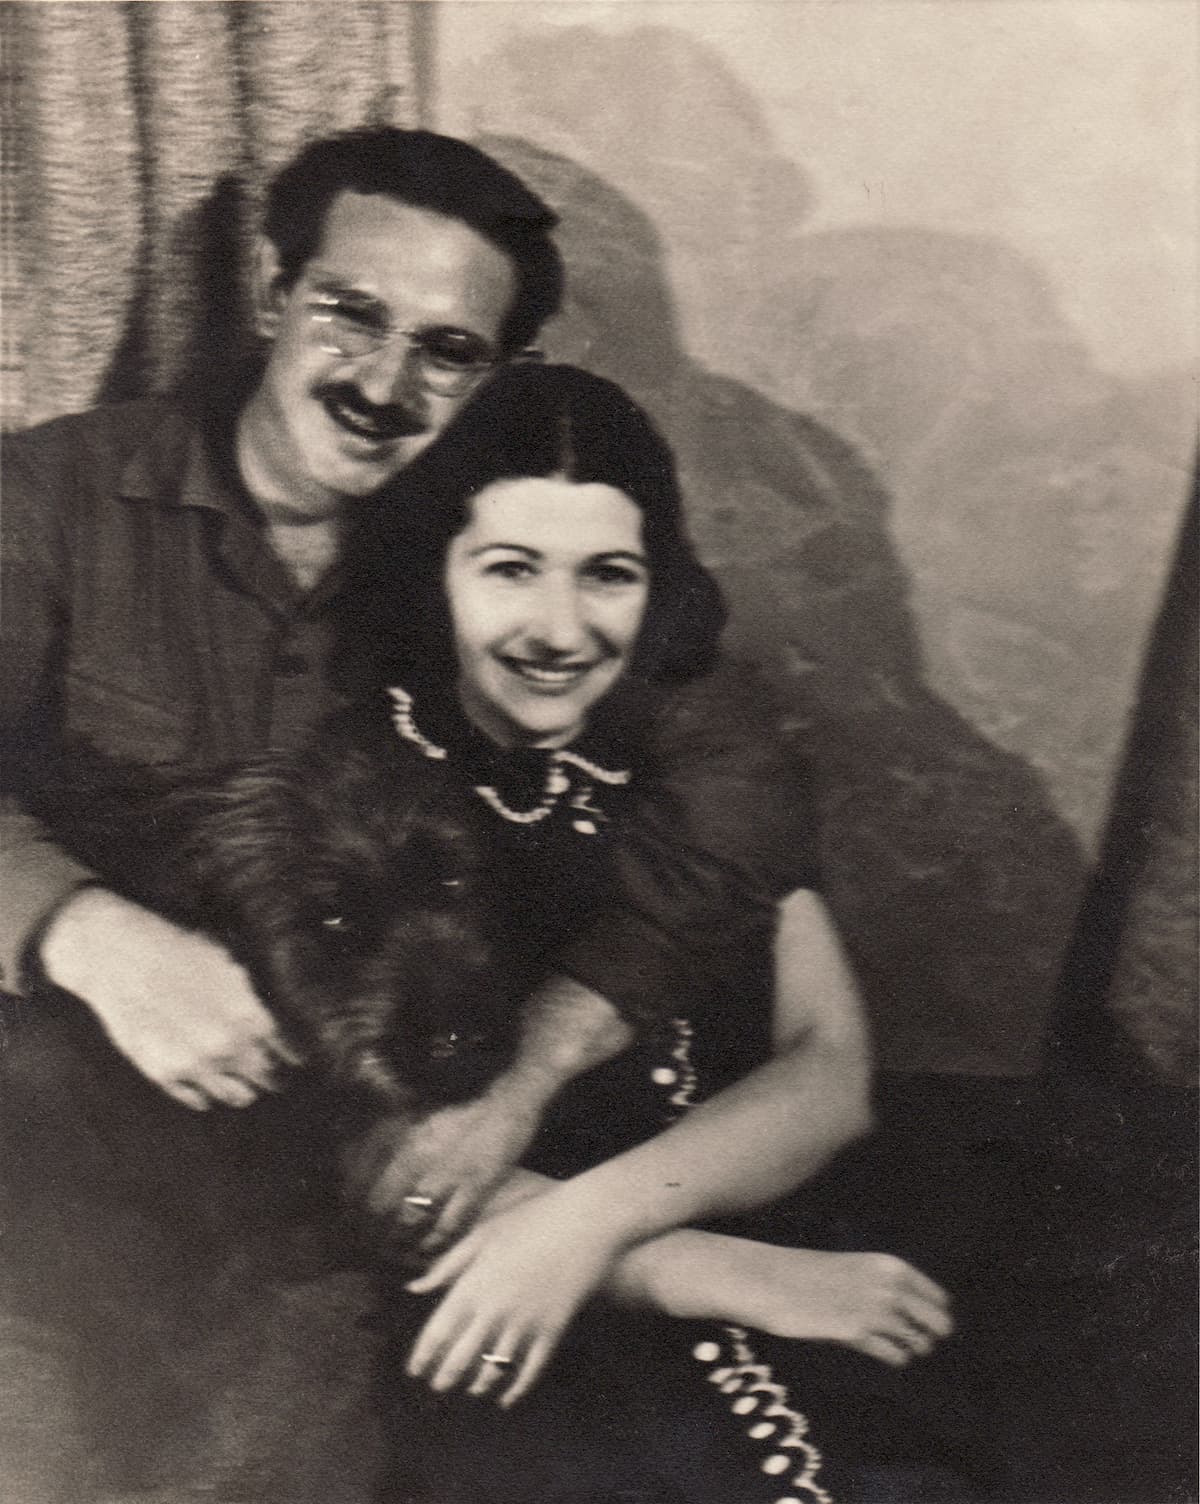 Ted and Roberta Thomas with their dog